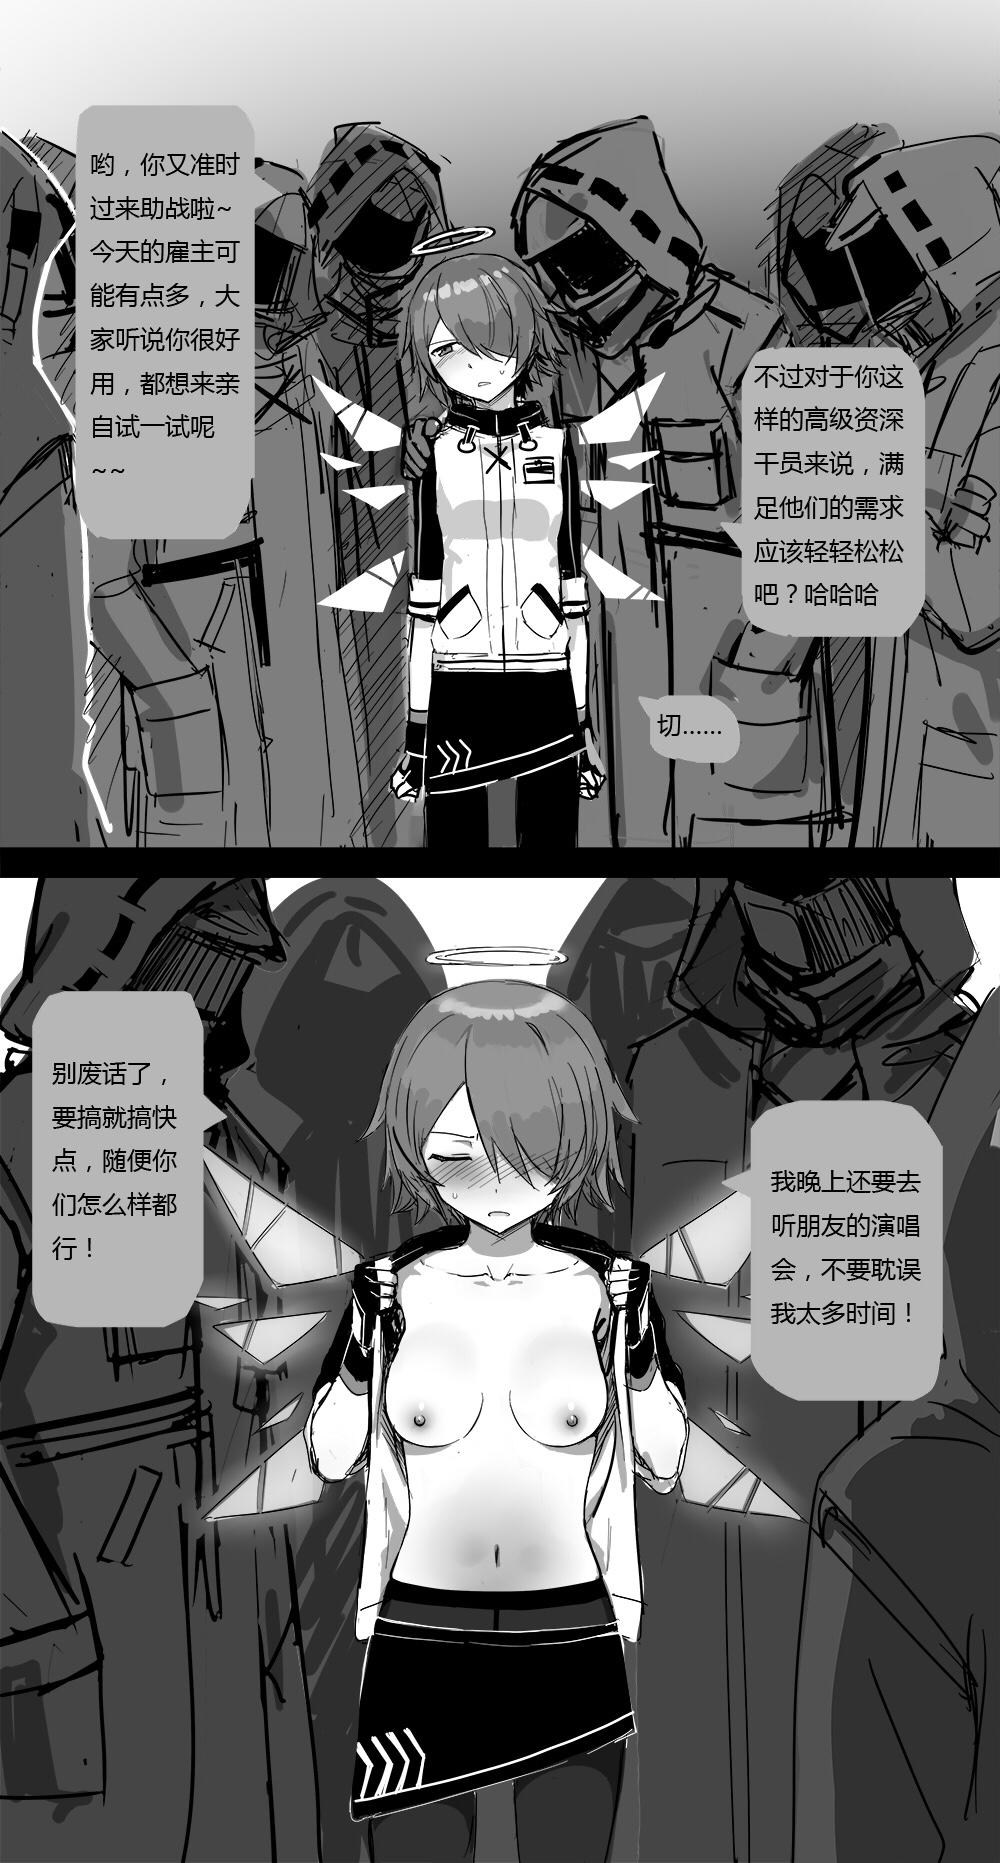 Threesome 无能狂怒 - Arknights Solo - Page 6